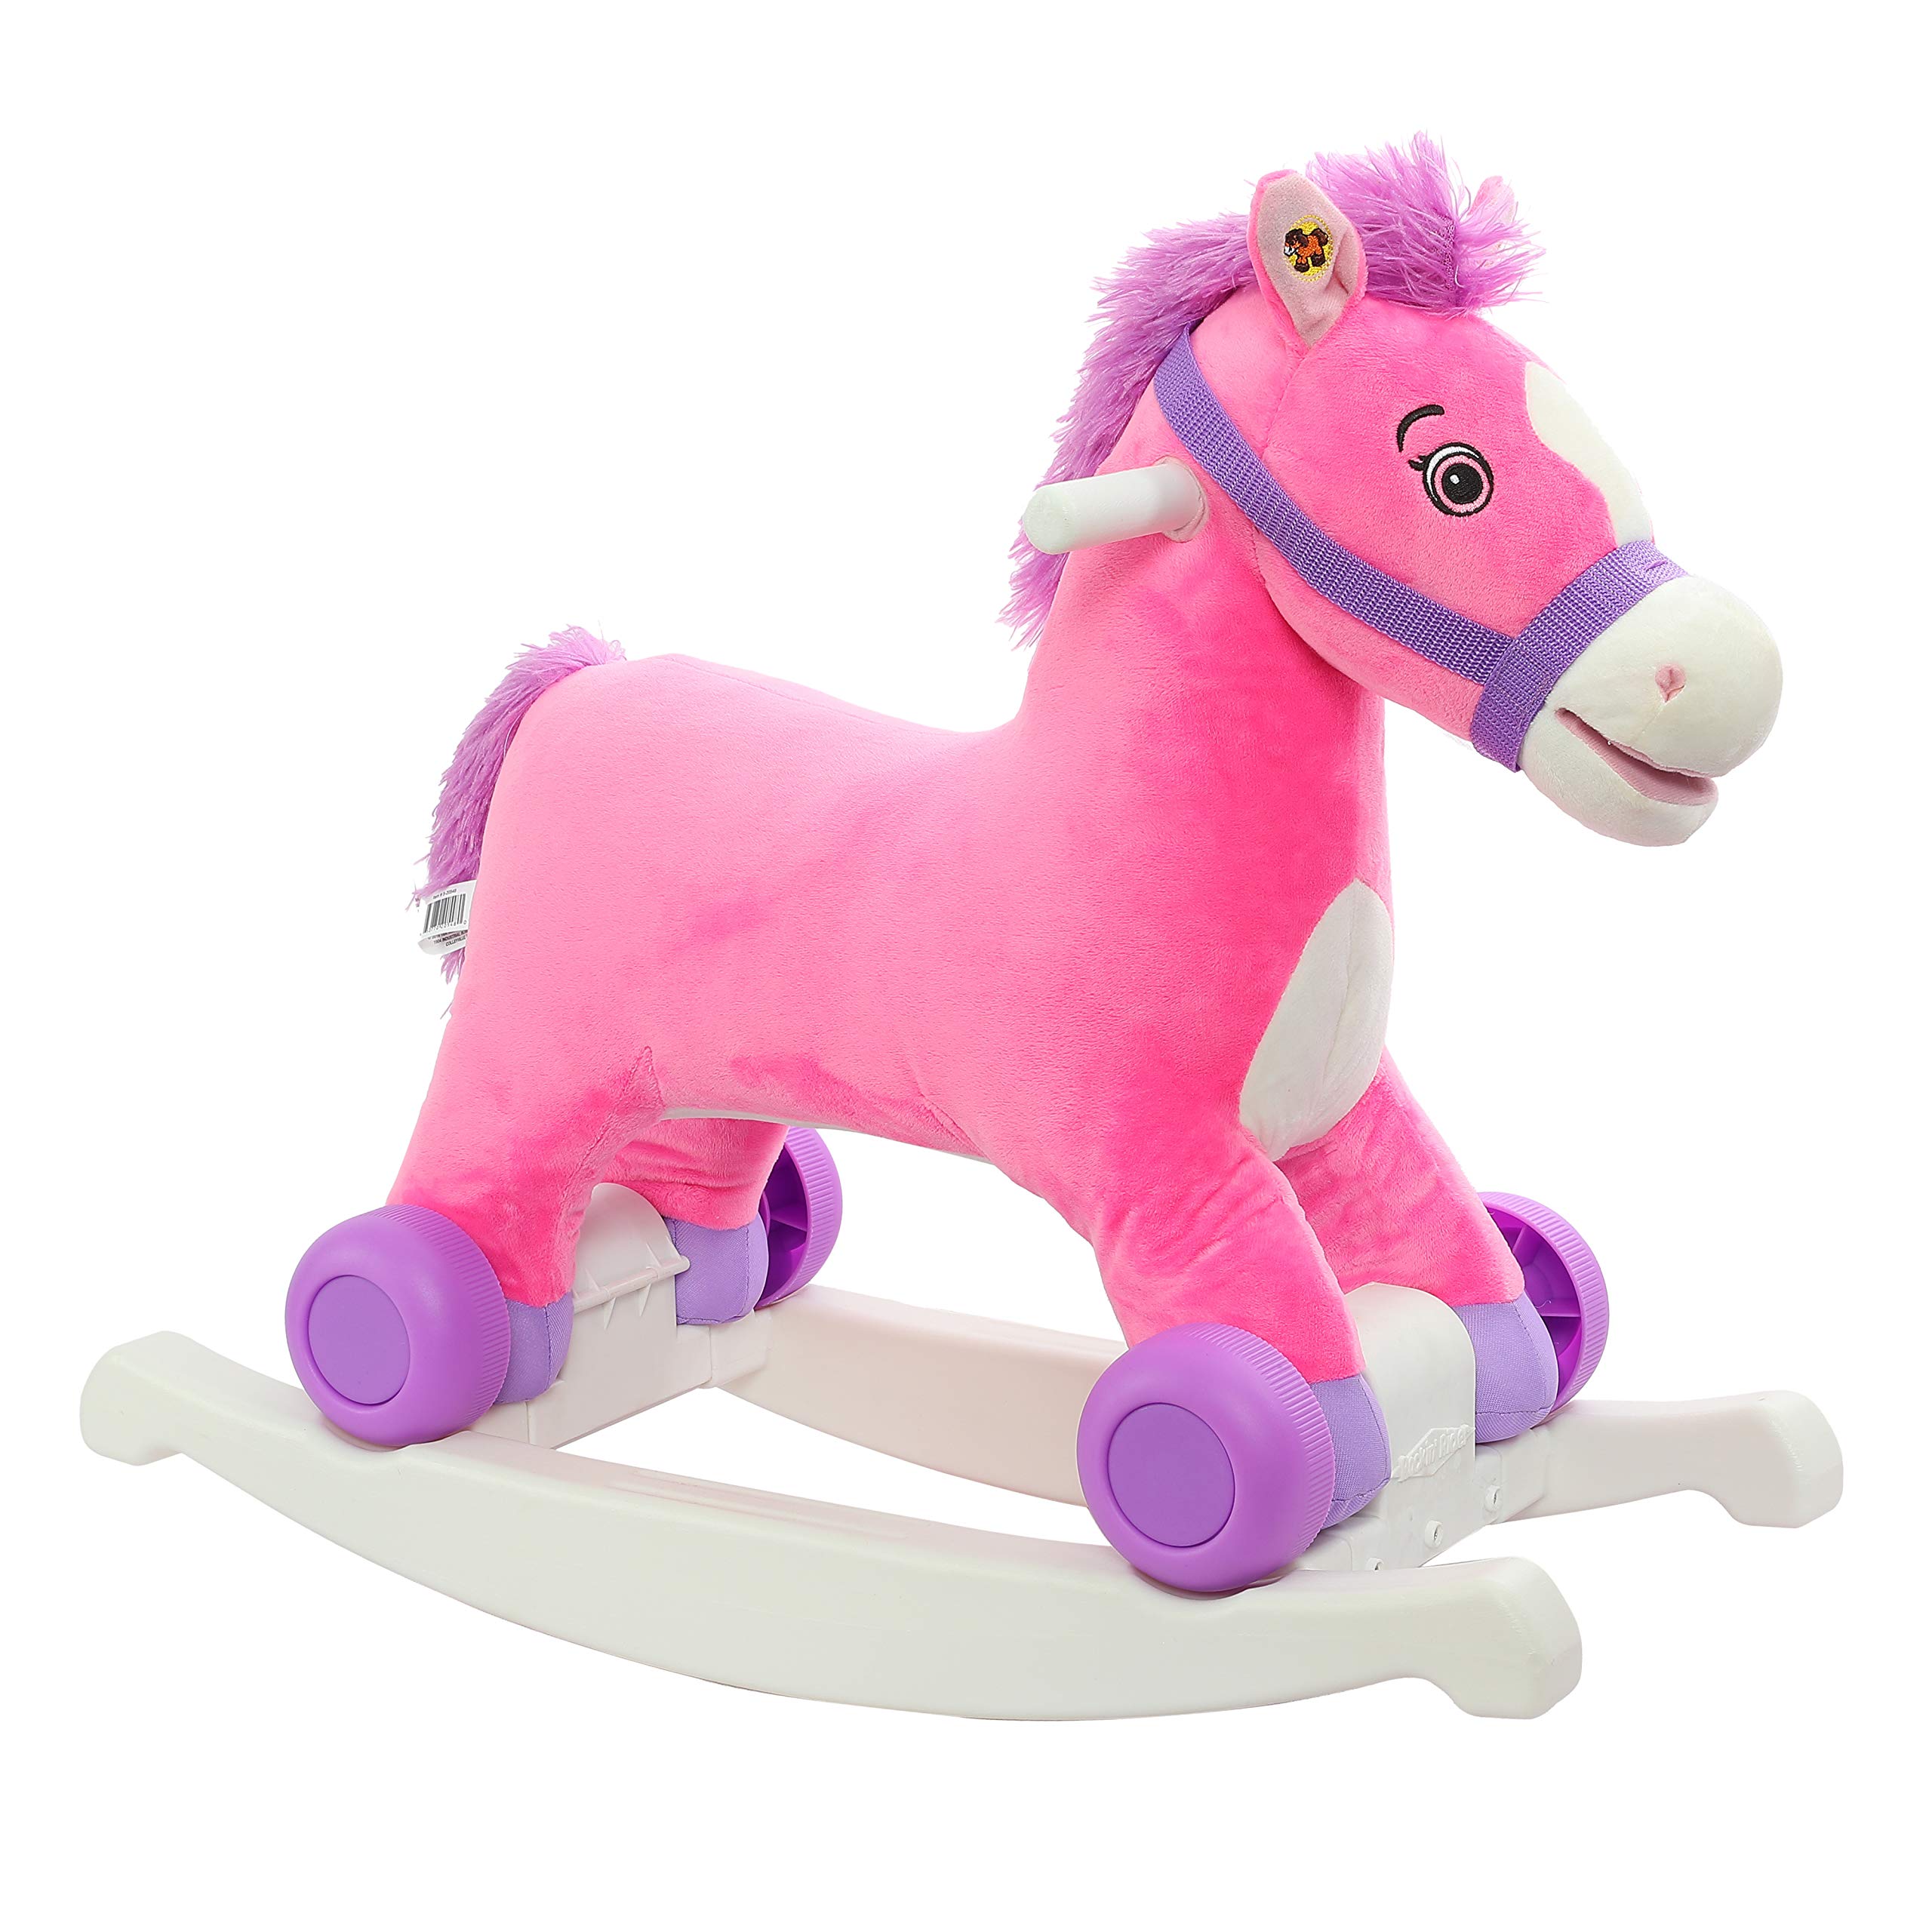 Rockin' Rider Candy 2-in-1 Pony Ride-On, Pink